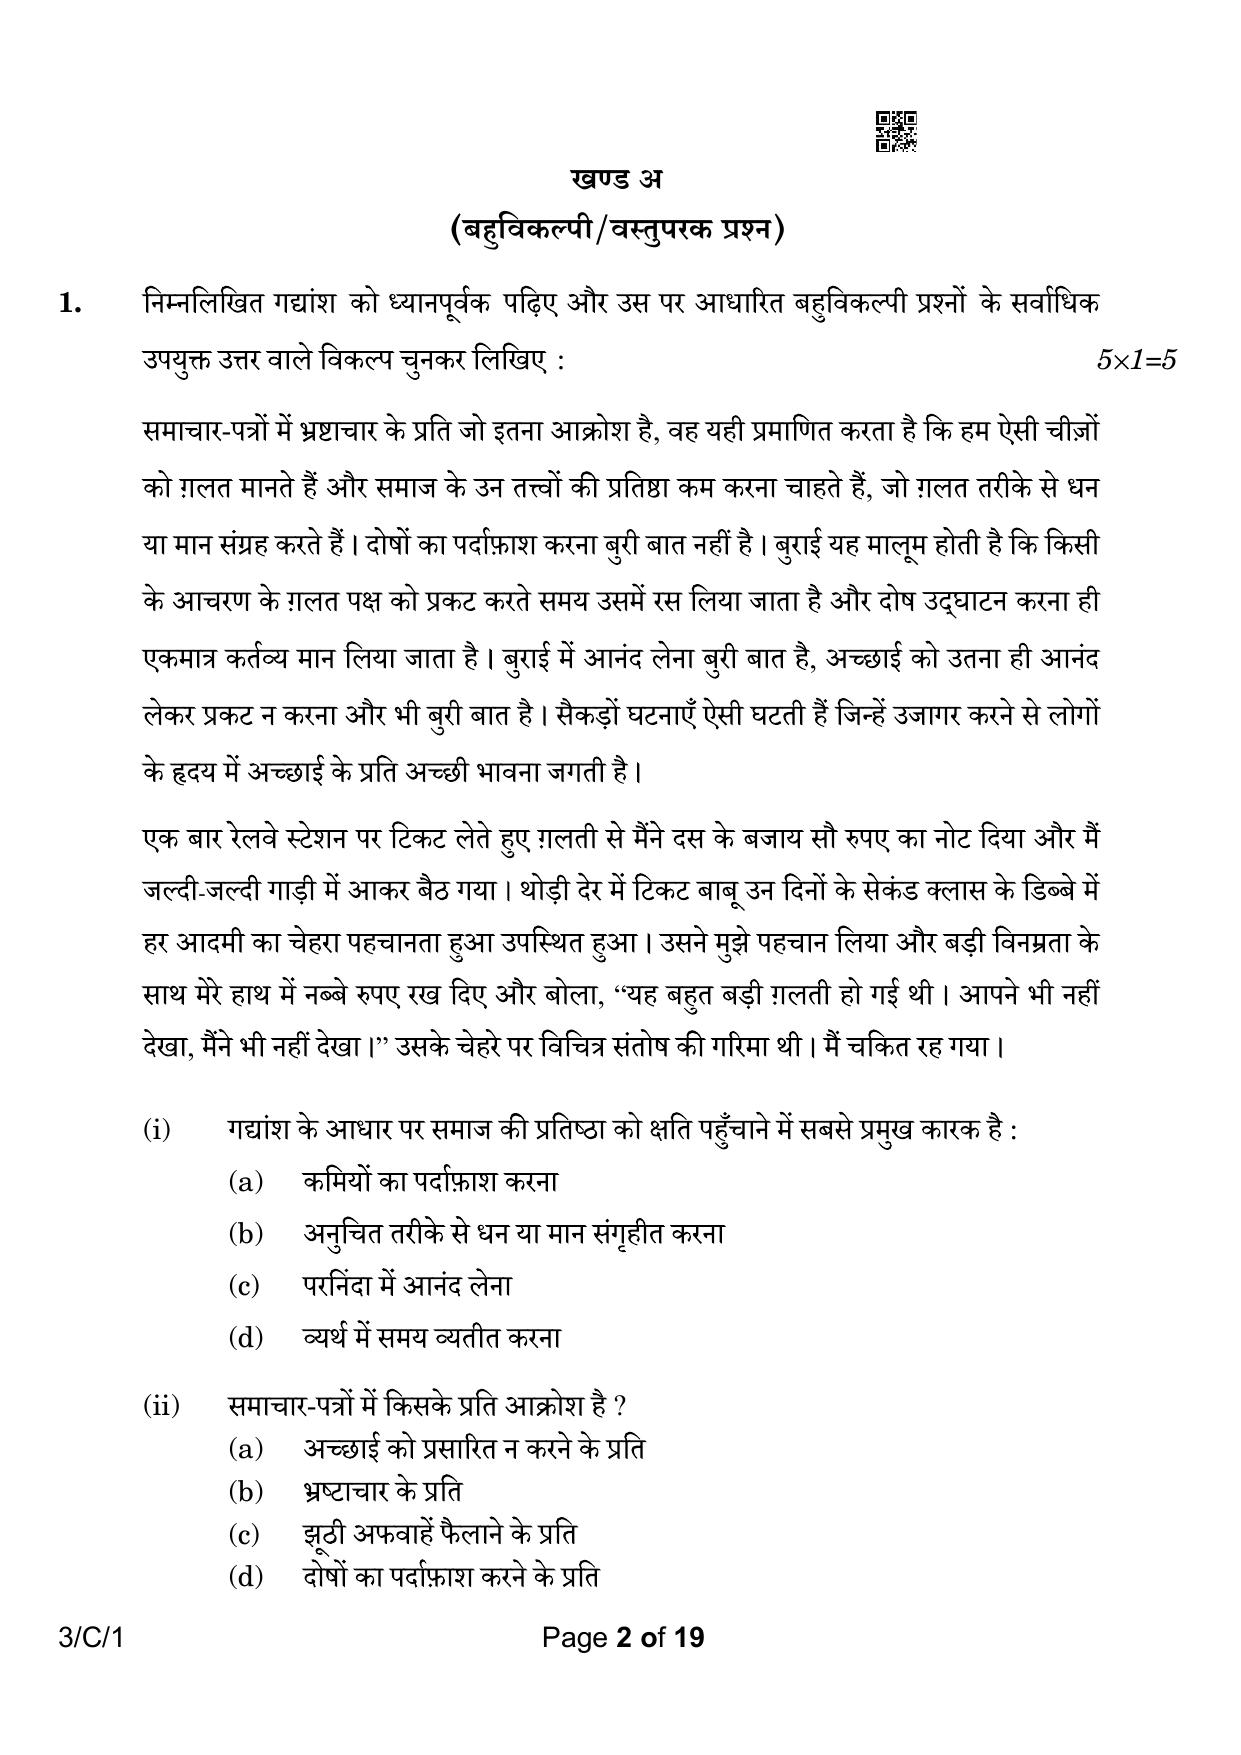 CBSE Class 10 3-1 Hindi A 2023 (Compartment) Question Paper - Page 2